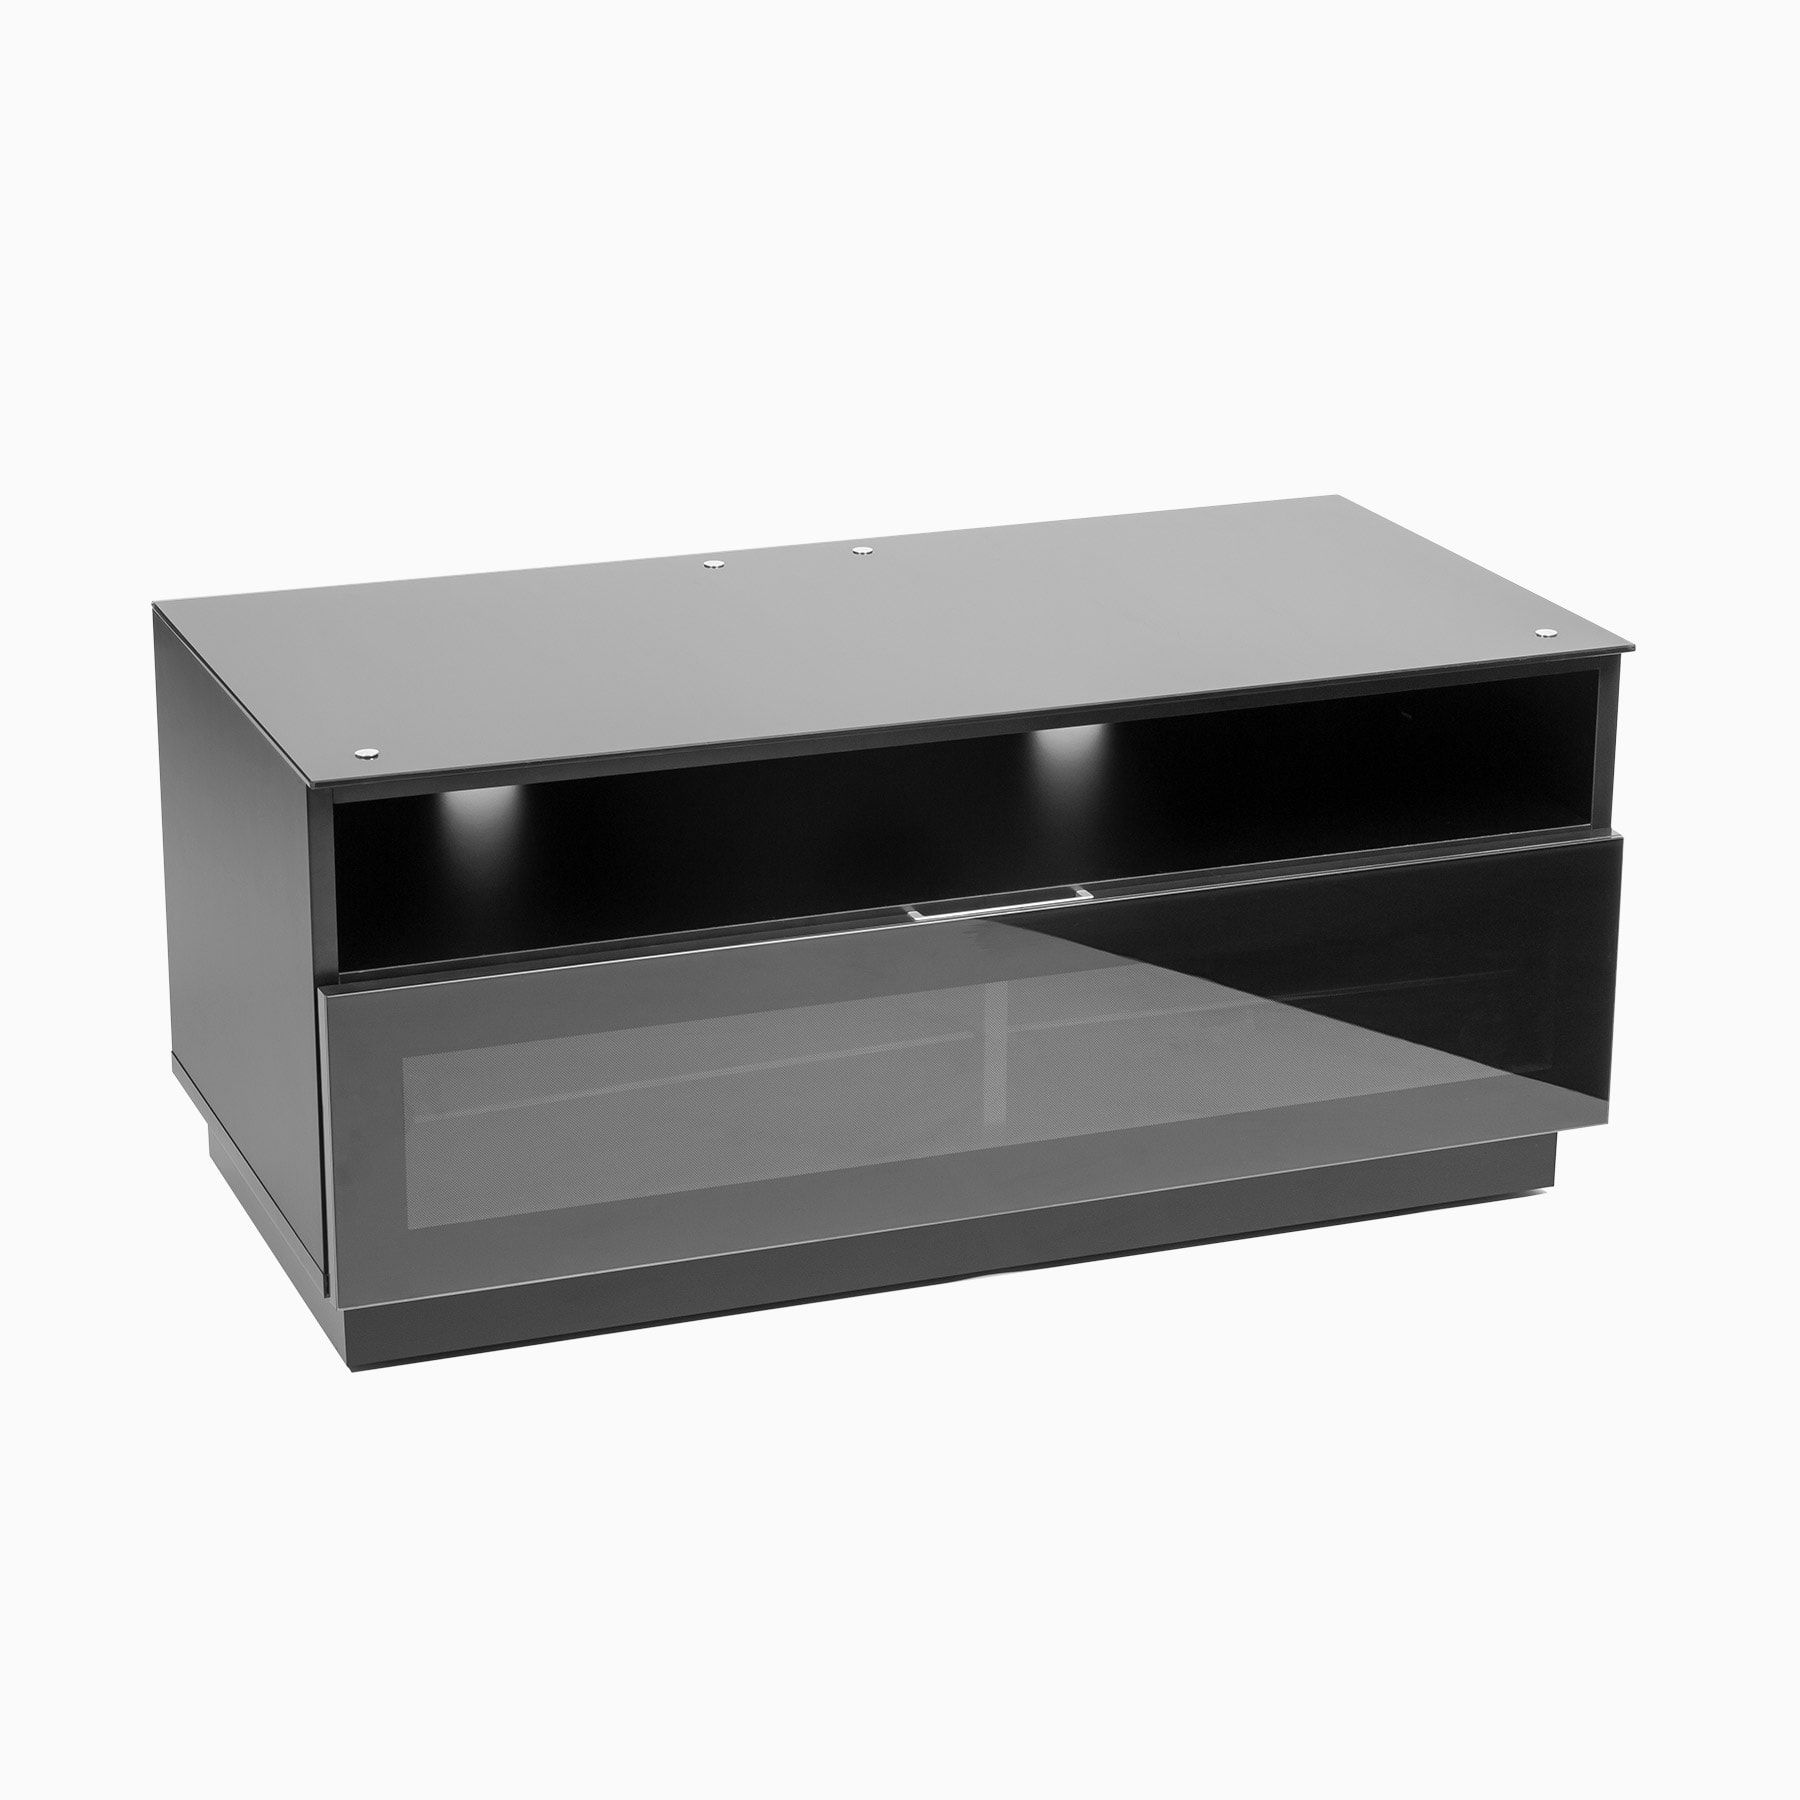 Black Gloss Tv Unit Up To 65 Inch Flat Tv | Mmt D1500 With Regard To Black Gloss Tv Units (View 13 of 15)